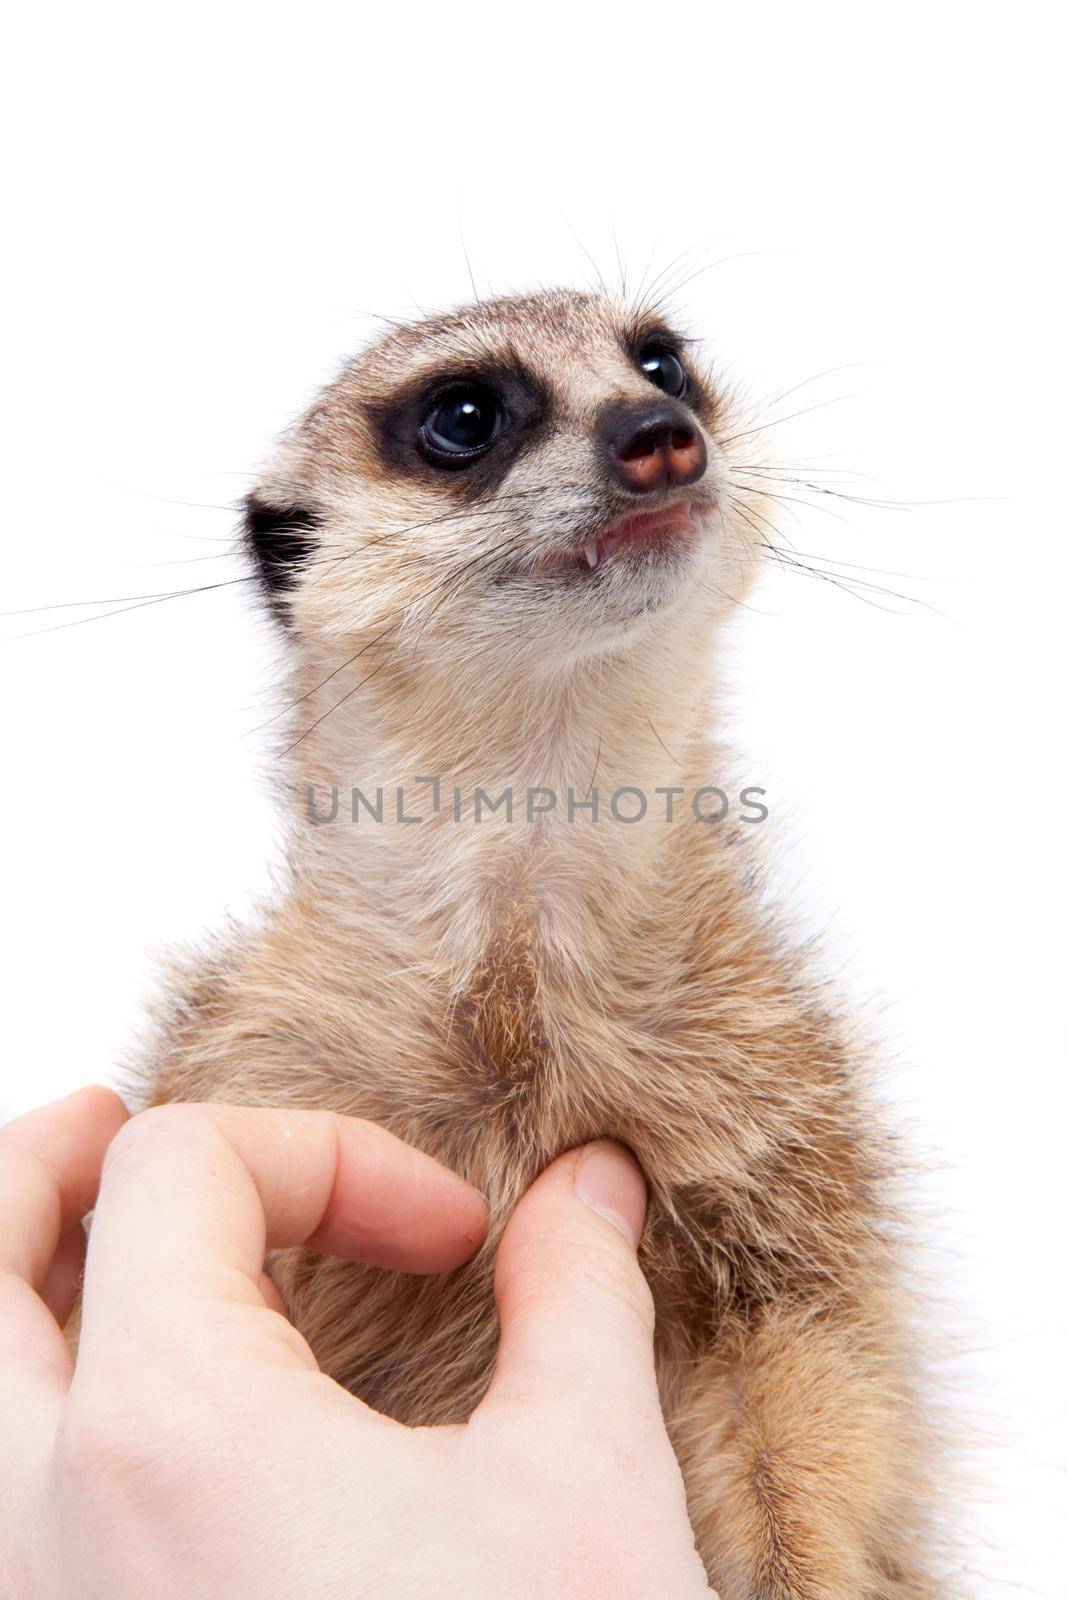 The meerkat or suricate cub, 2 month old, on white by RosaJay